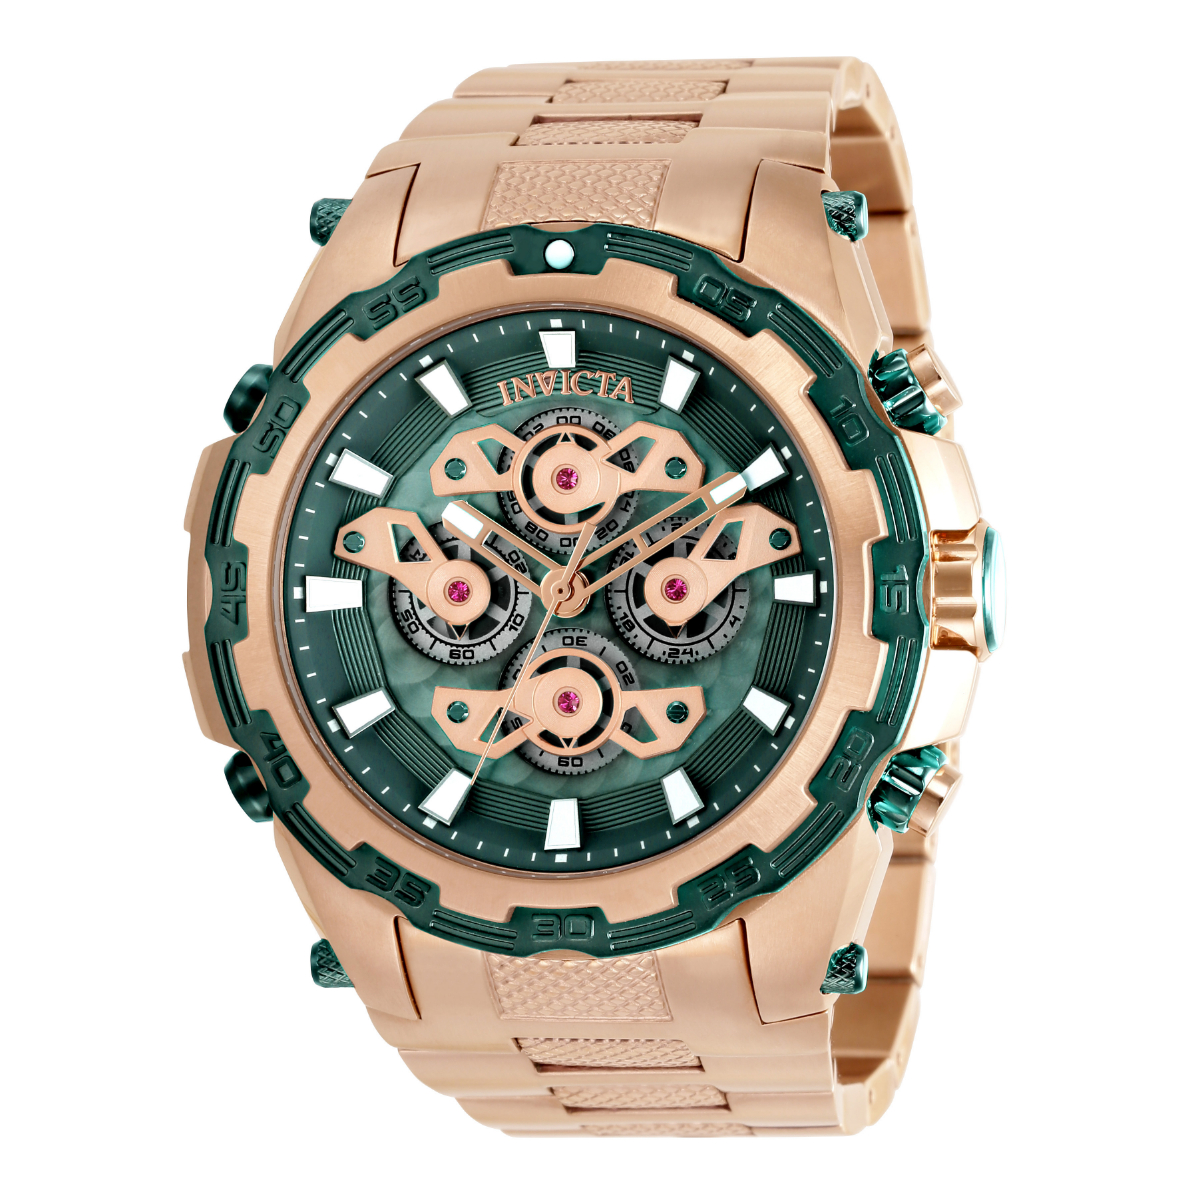 Invicta Specialty Men's Watch - 50mm, Rose Gold (ZG-34227)